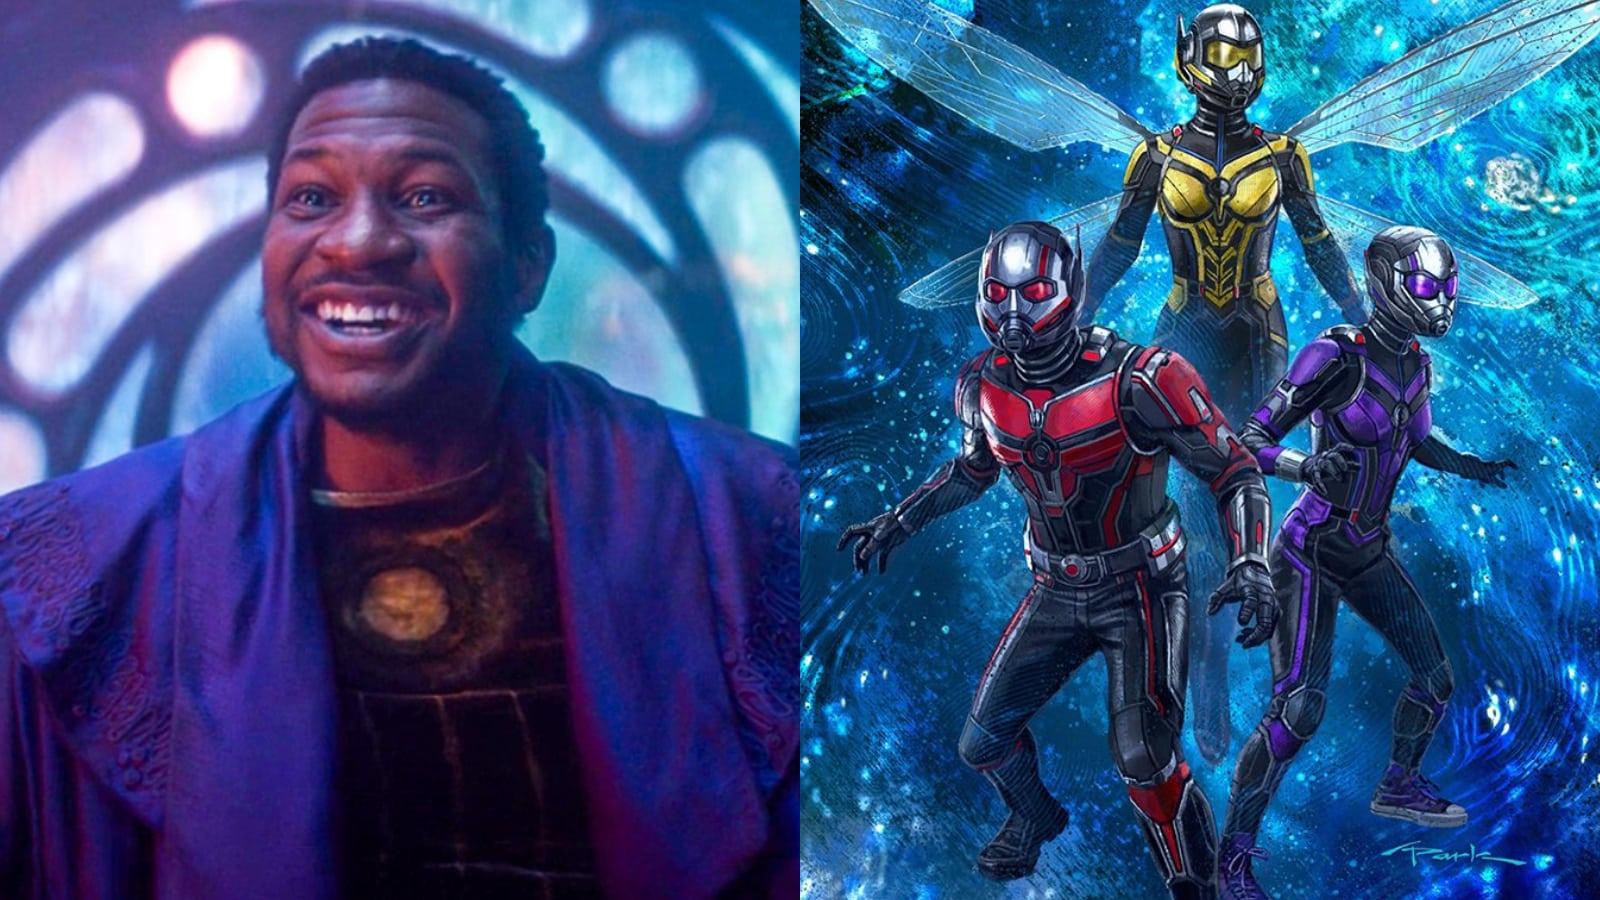 Jonathan Majors as Kang/He Who Remains and the first poster for Ant-Man and the Wasp: Quantumania